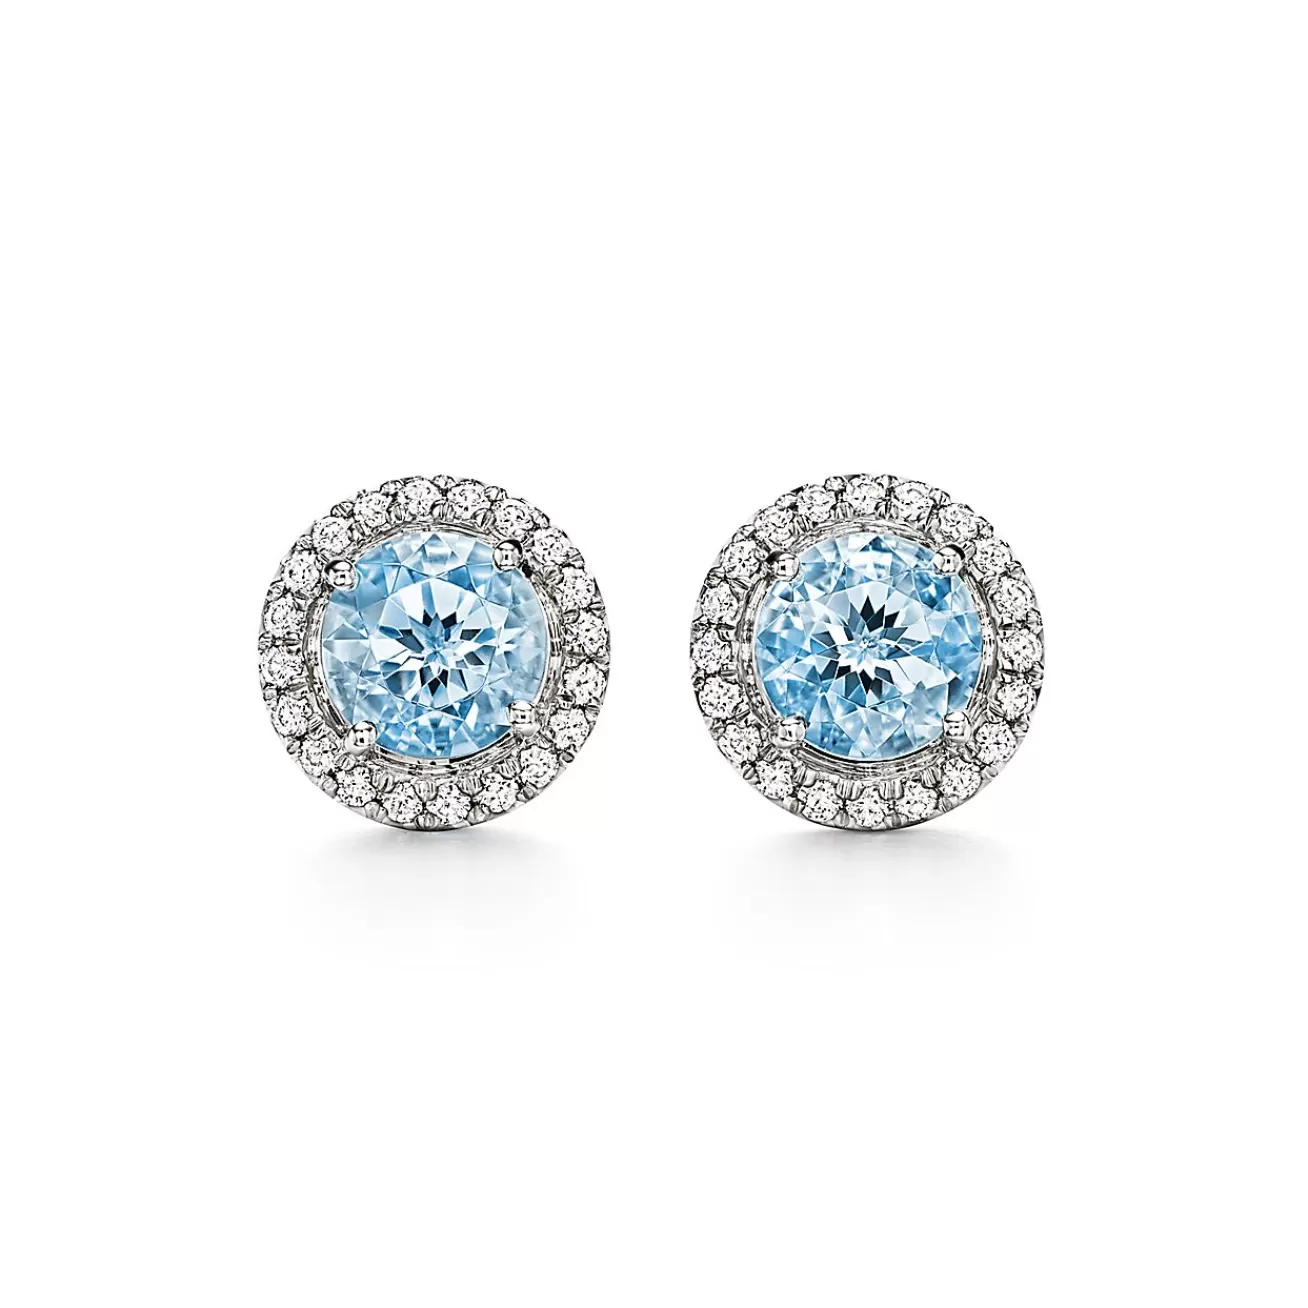 Tiffany & Co. Tiffany Soleste® earrings in platinum with aquamarines and diamonds. | ^ Earrings | Gifts for Her